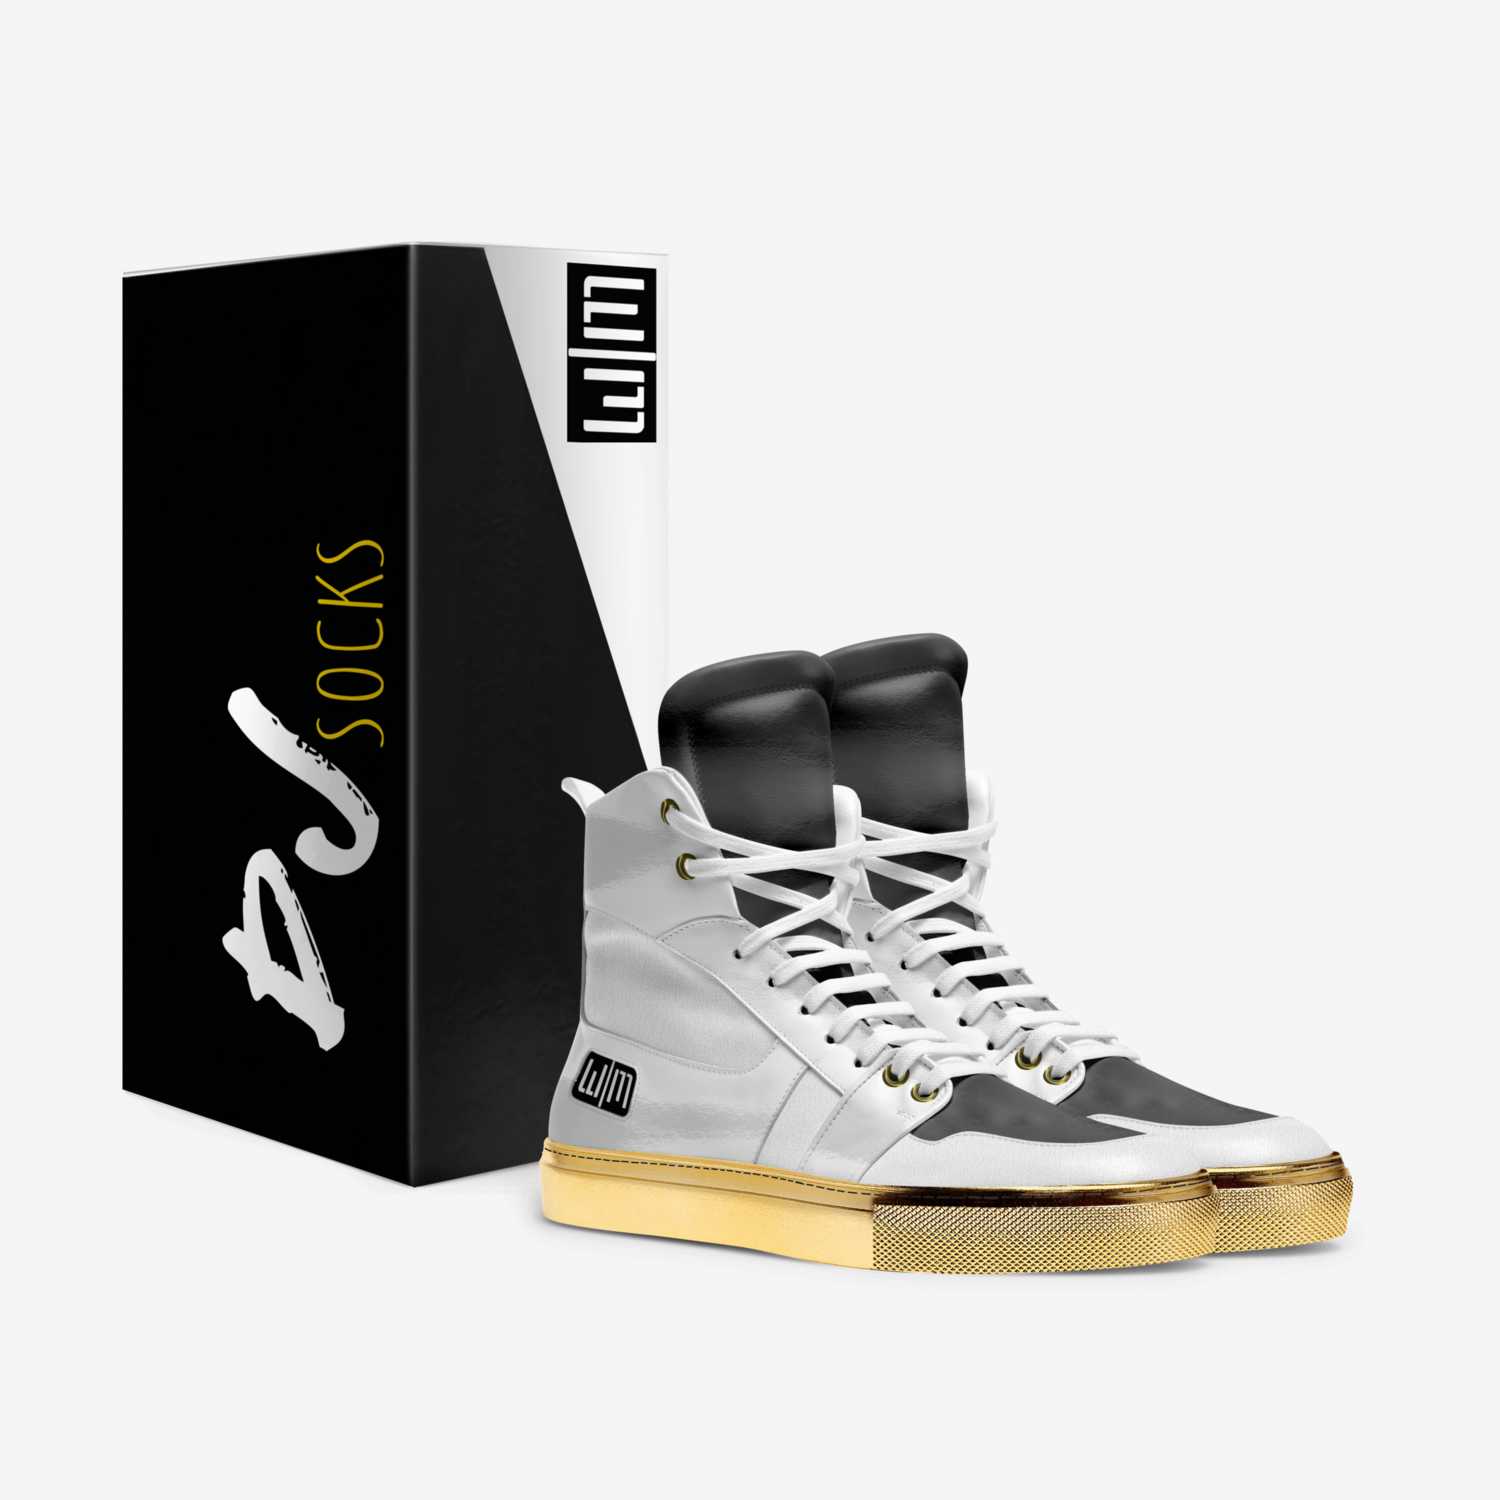 Dj Socks custom made in Italy shoes by Sidney Clayton Jr | Box view